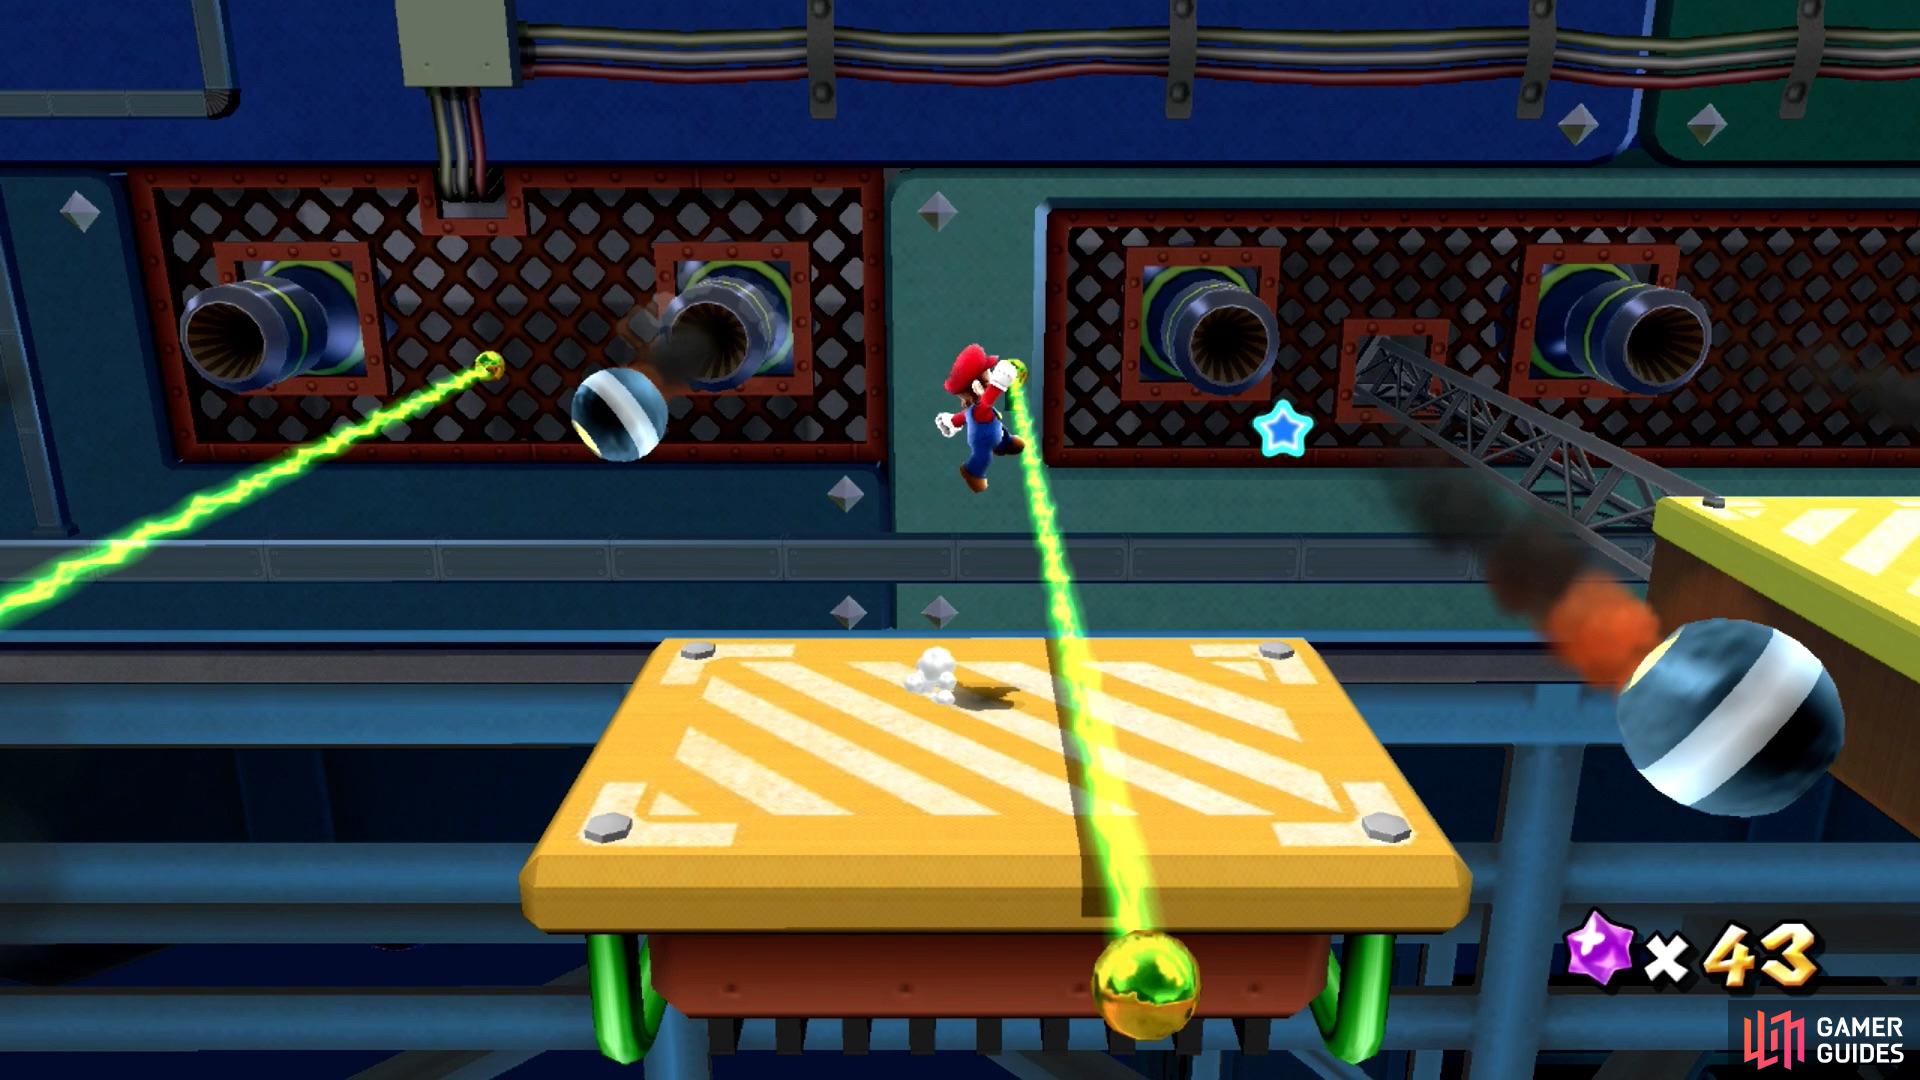 Getting hit by any of these hazards will most likely lead to Mario falling off the platform.